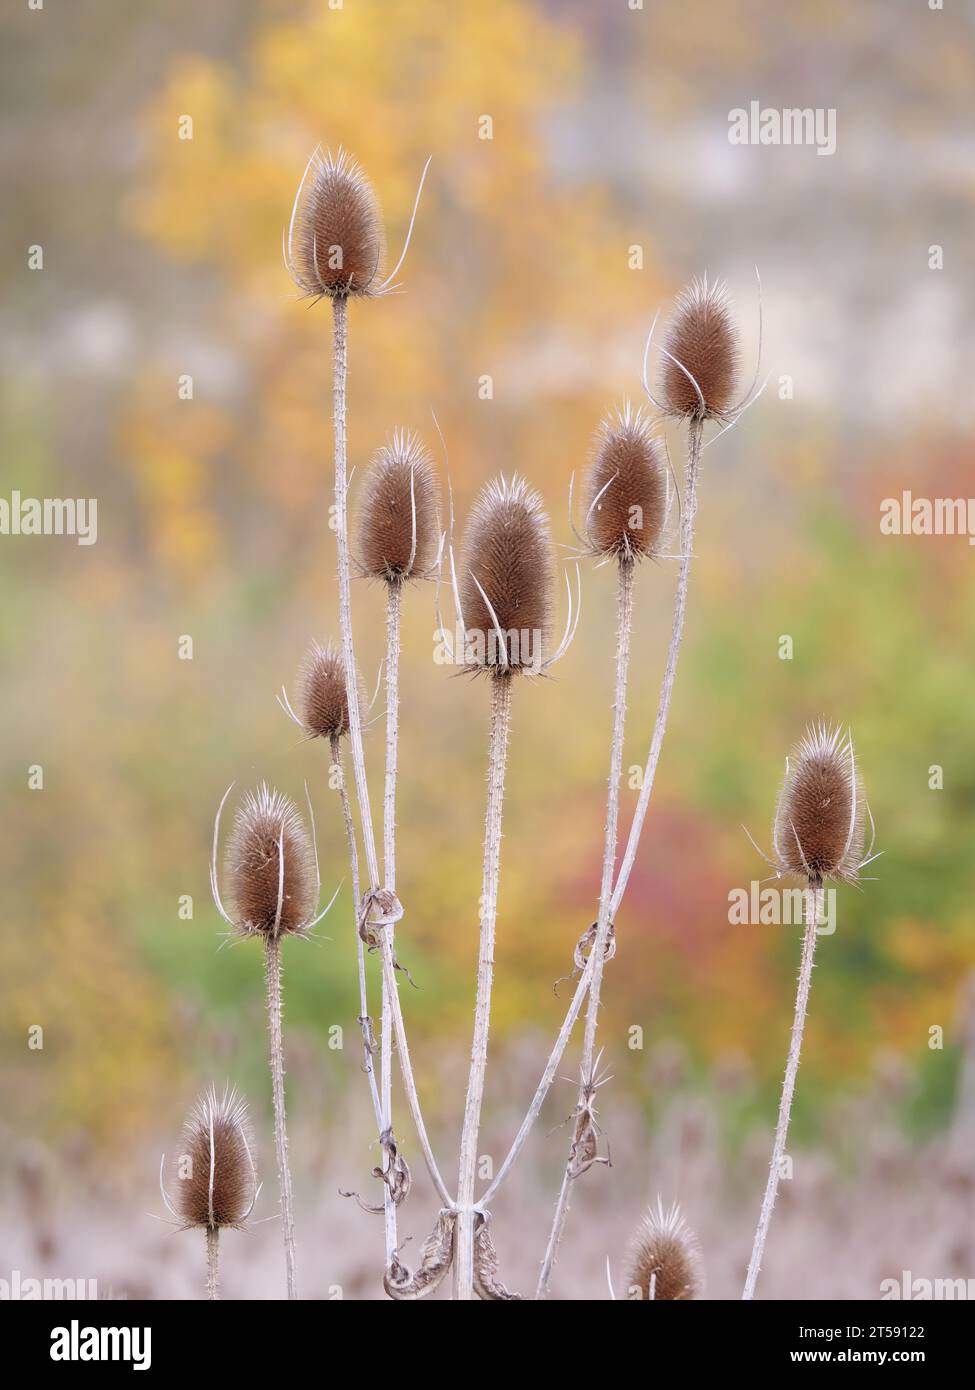 The ripe brown prickly fruit stalks of teasel (Dipsacus) in fall with bushes in the background Stock Photo